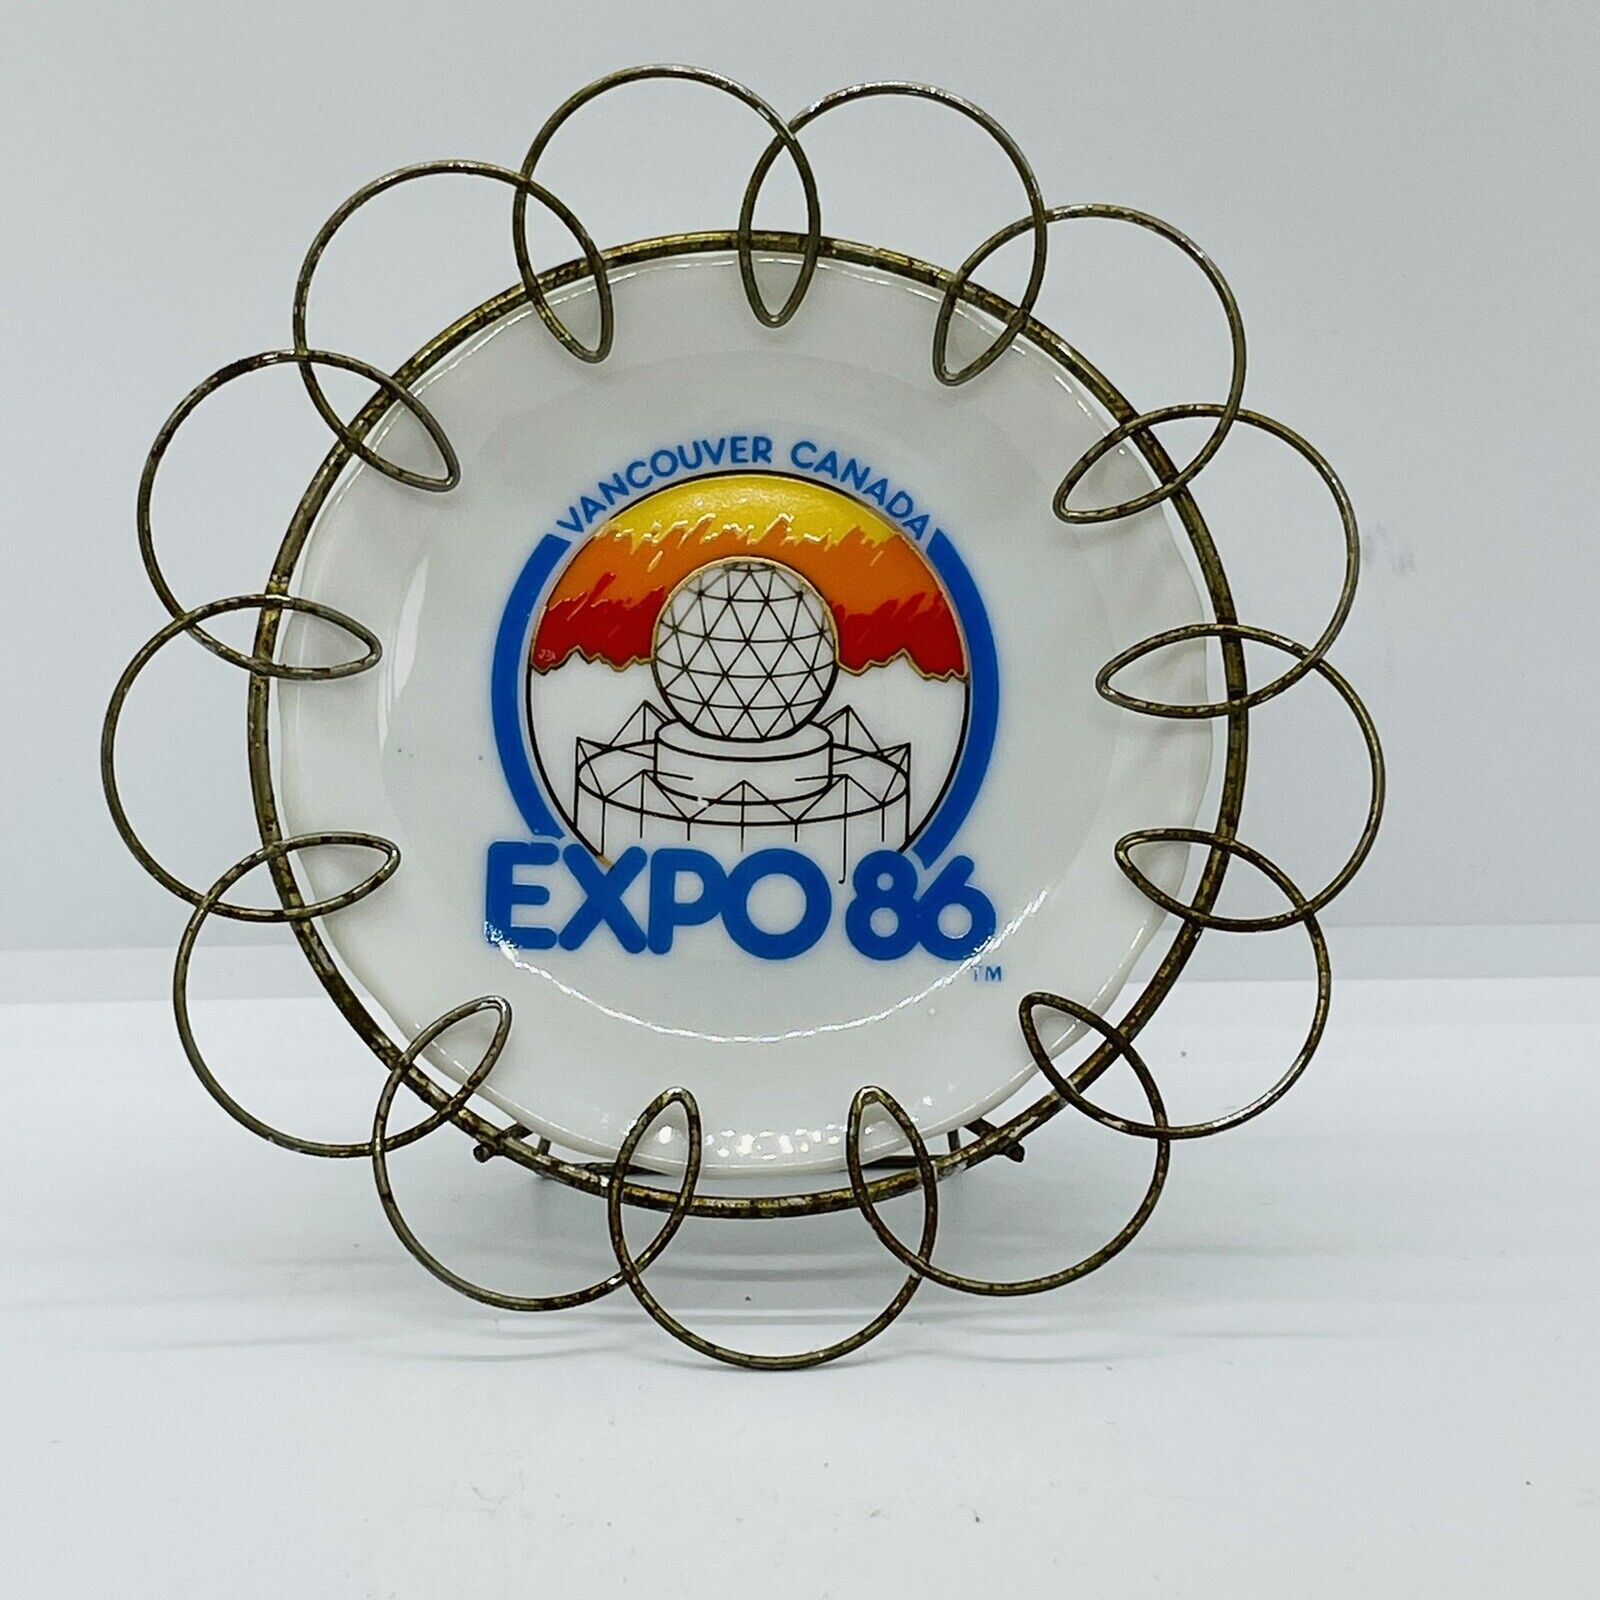 Expo 86 Vancouver Souvenir 3.5” Plate Wire Stand Geodesic Dome